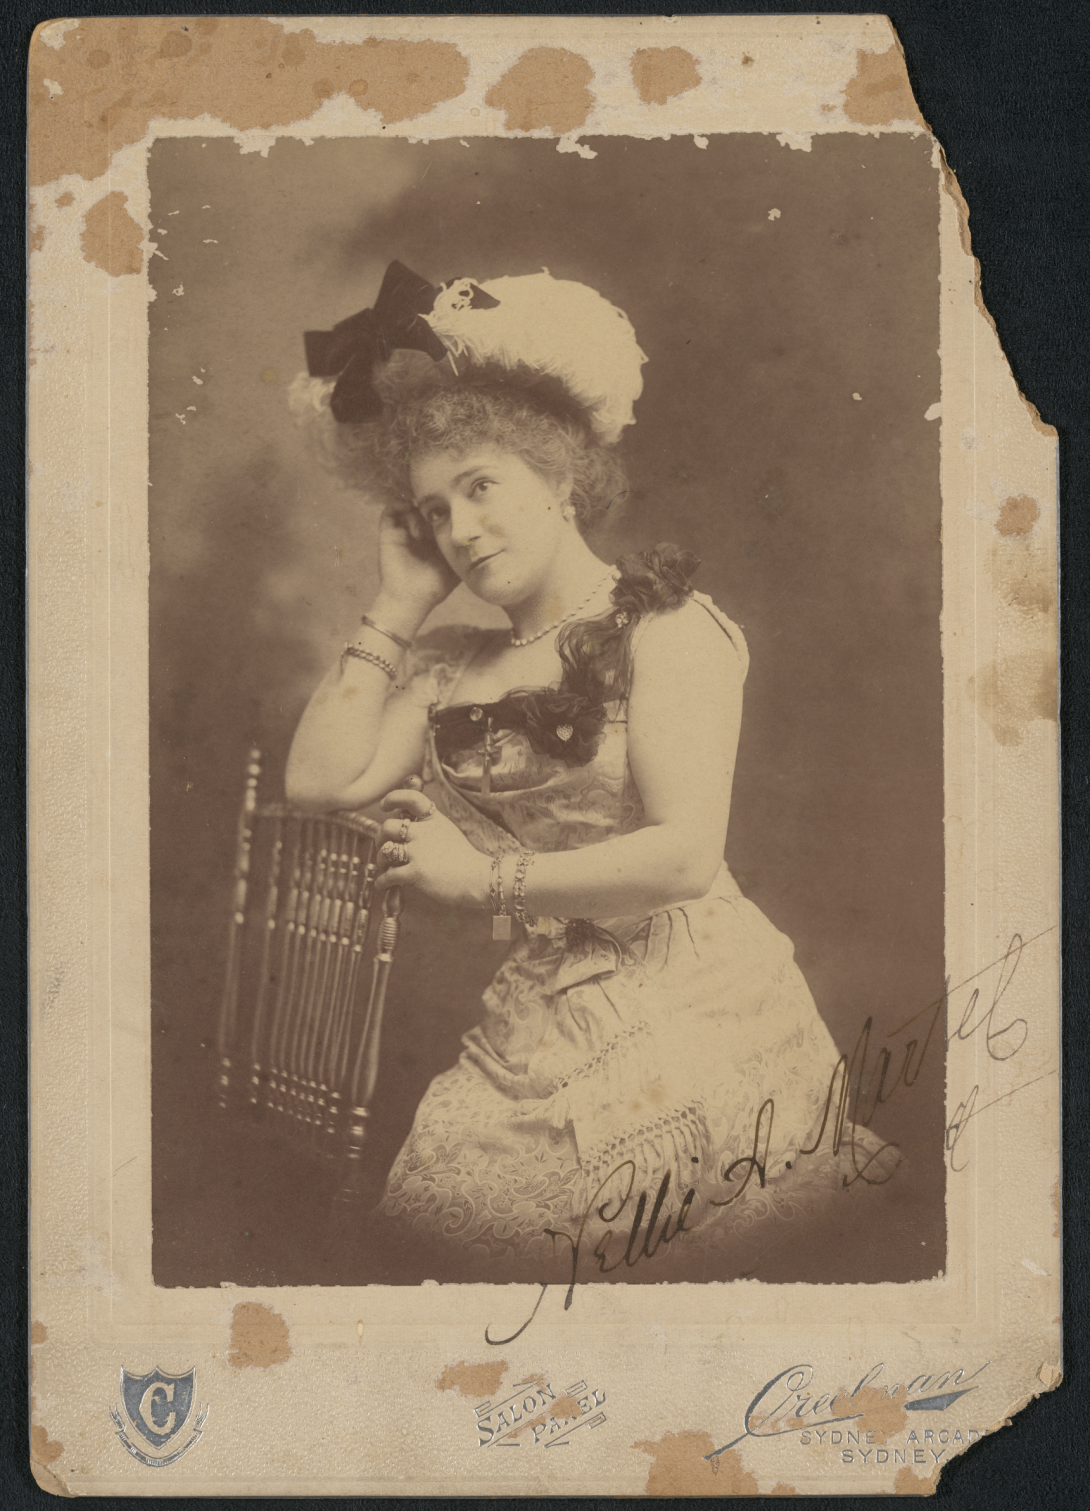 Old photograph of a woman with curly hair, around hat and a 1900s style dress leaning on a chair